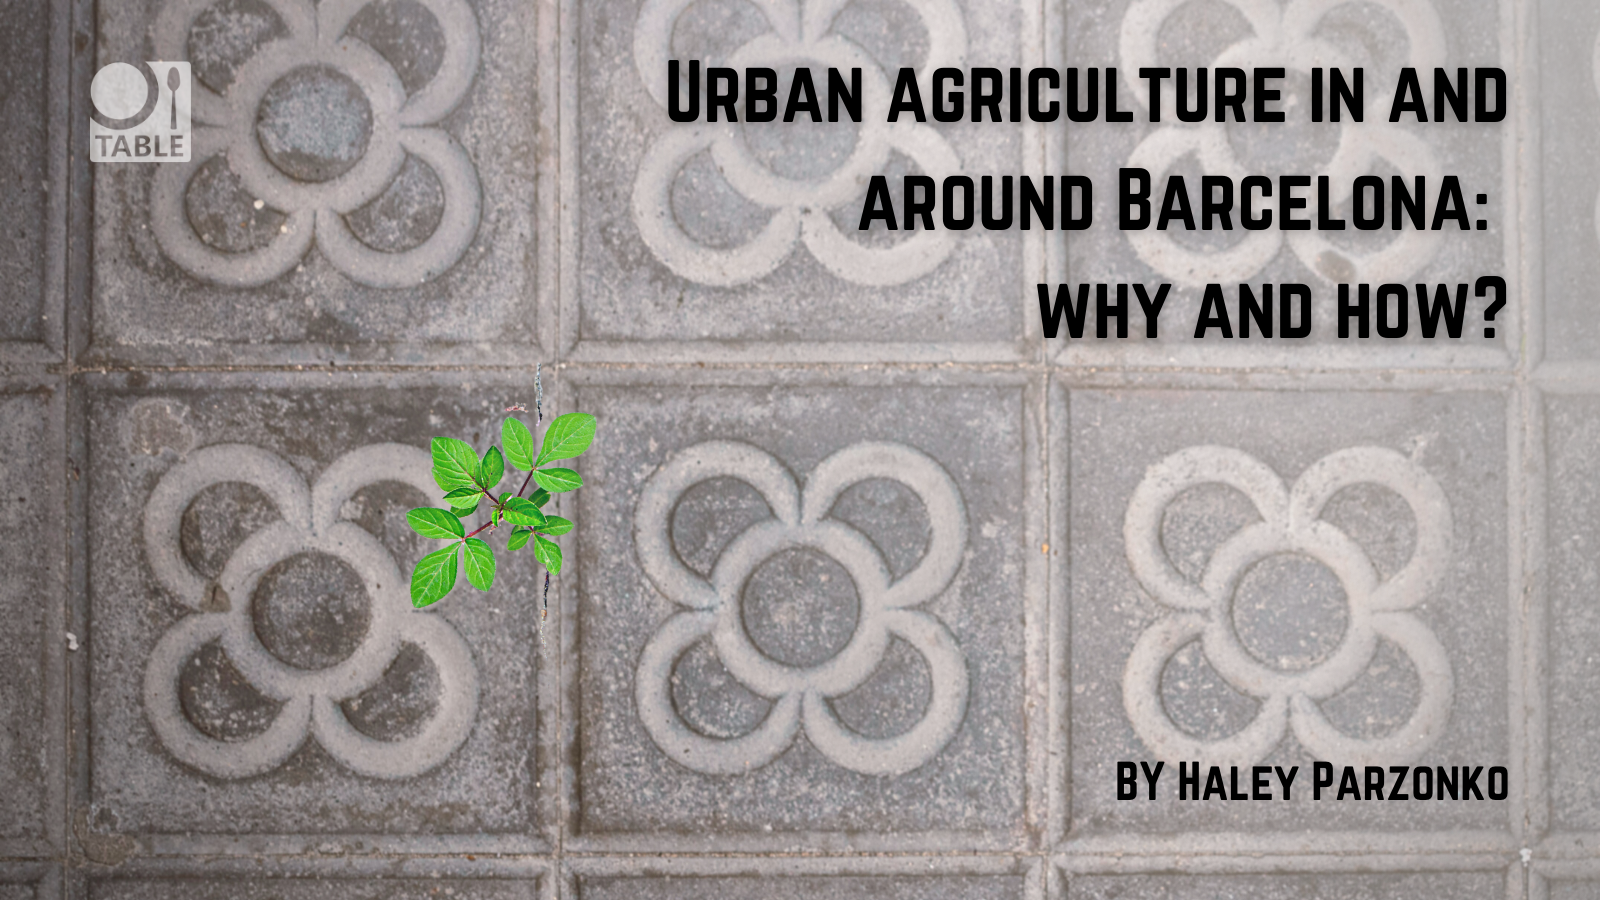 A flyer advertising a new blog from TABLE titled "Urban agriculture in and around Barcelona: Why and how?" by Haley Parzonko. The background is the flor de Barcelona tile pattern with a small plant sprouting in between the tiles.